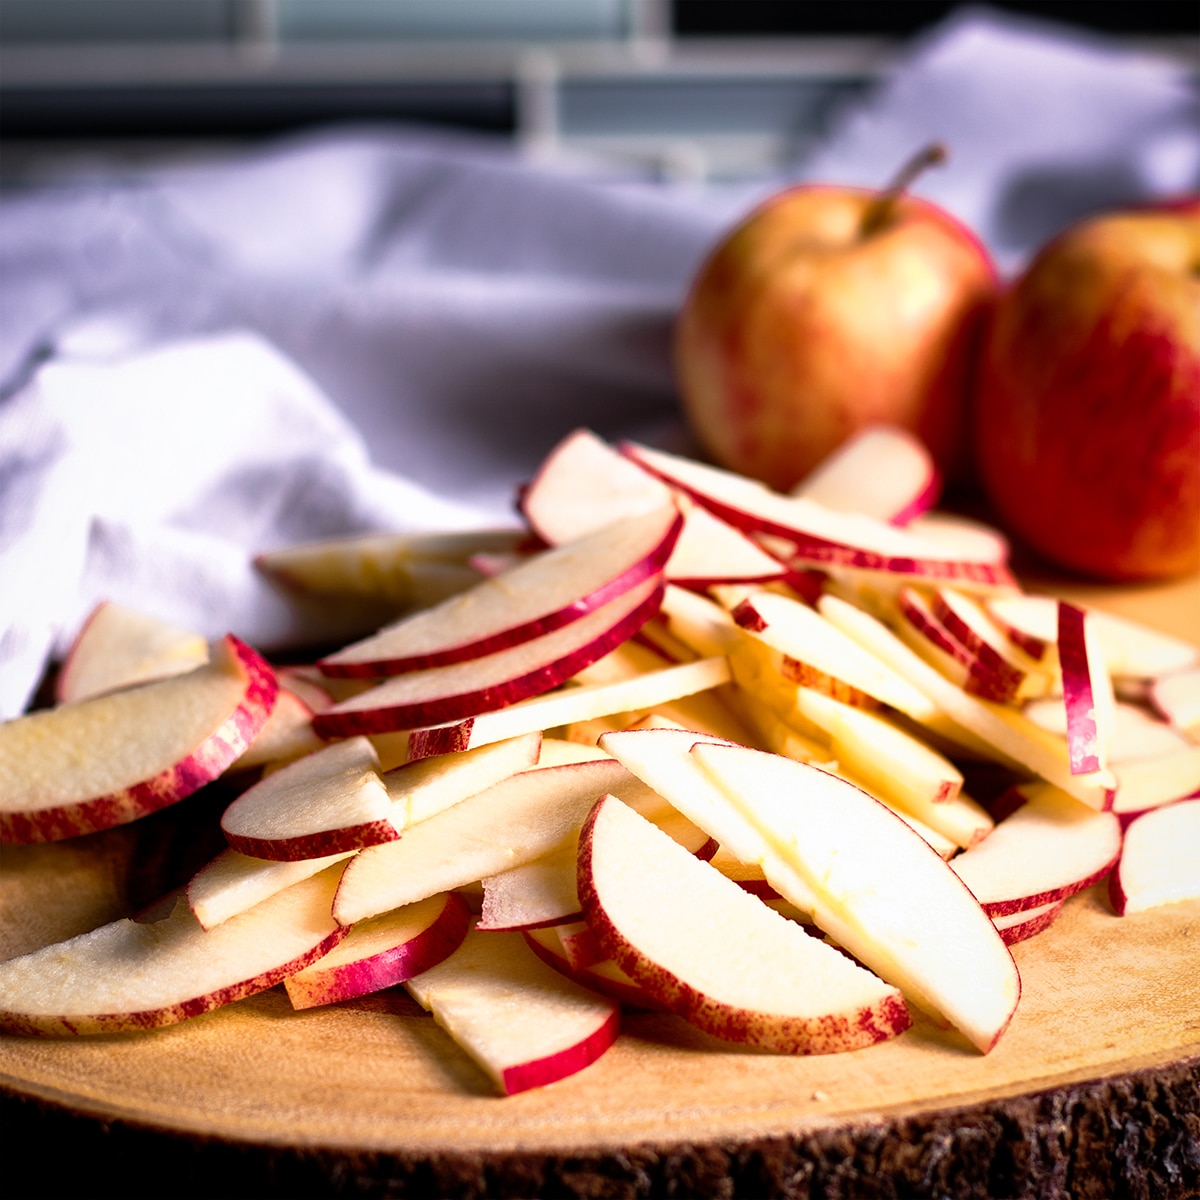 A pile of apple slices on a wood cutting board.